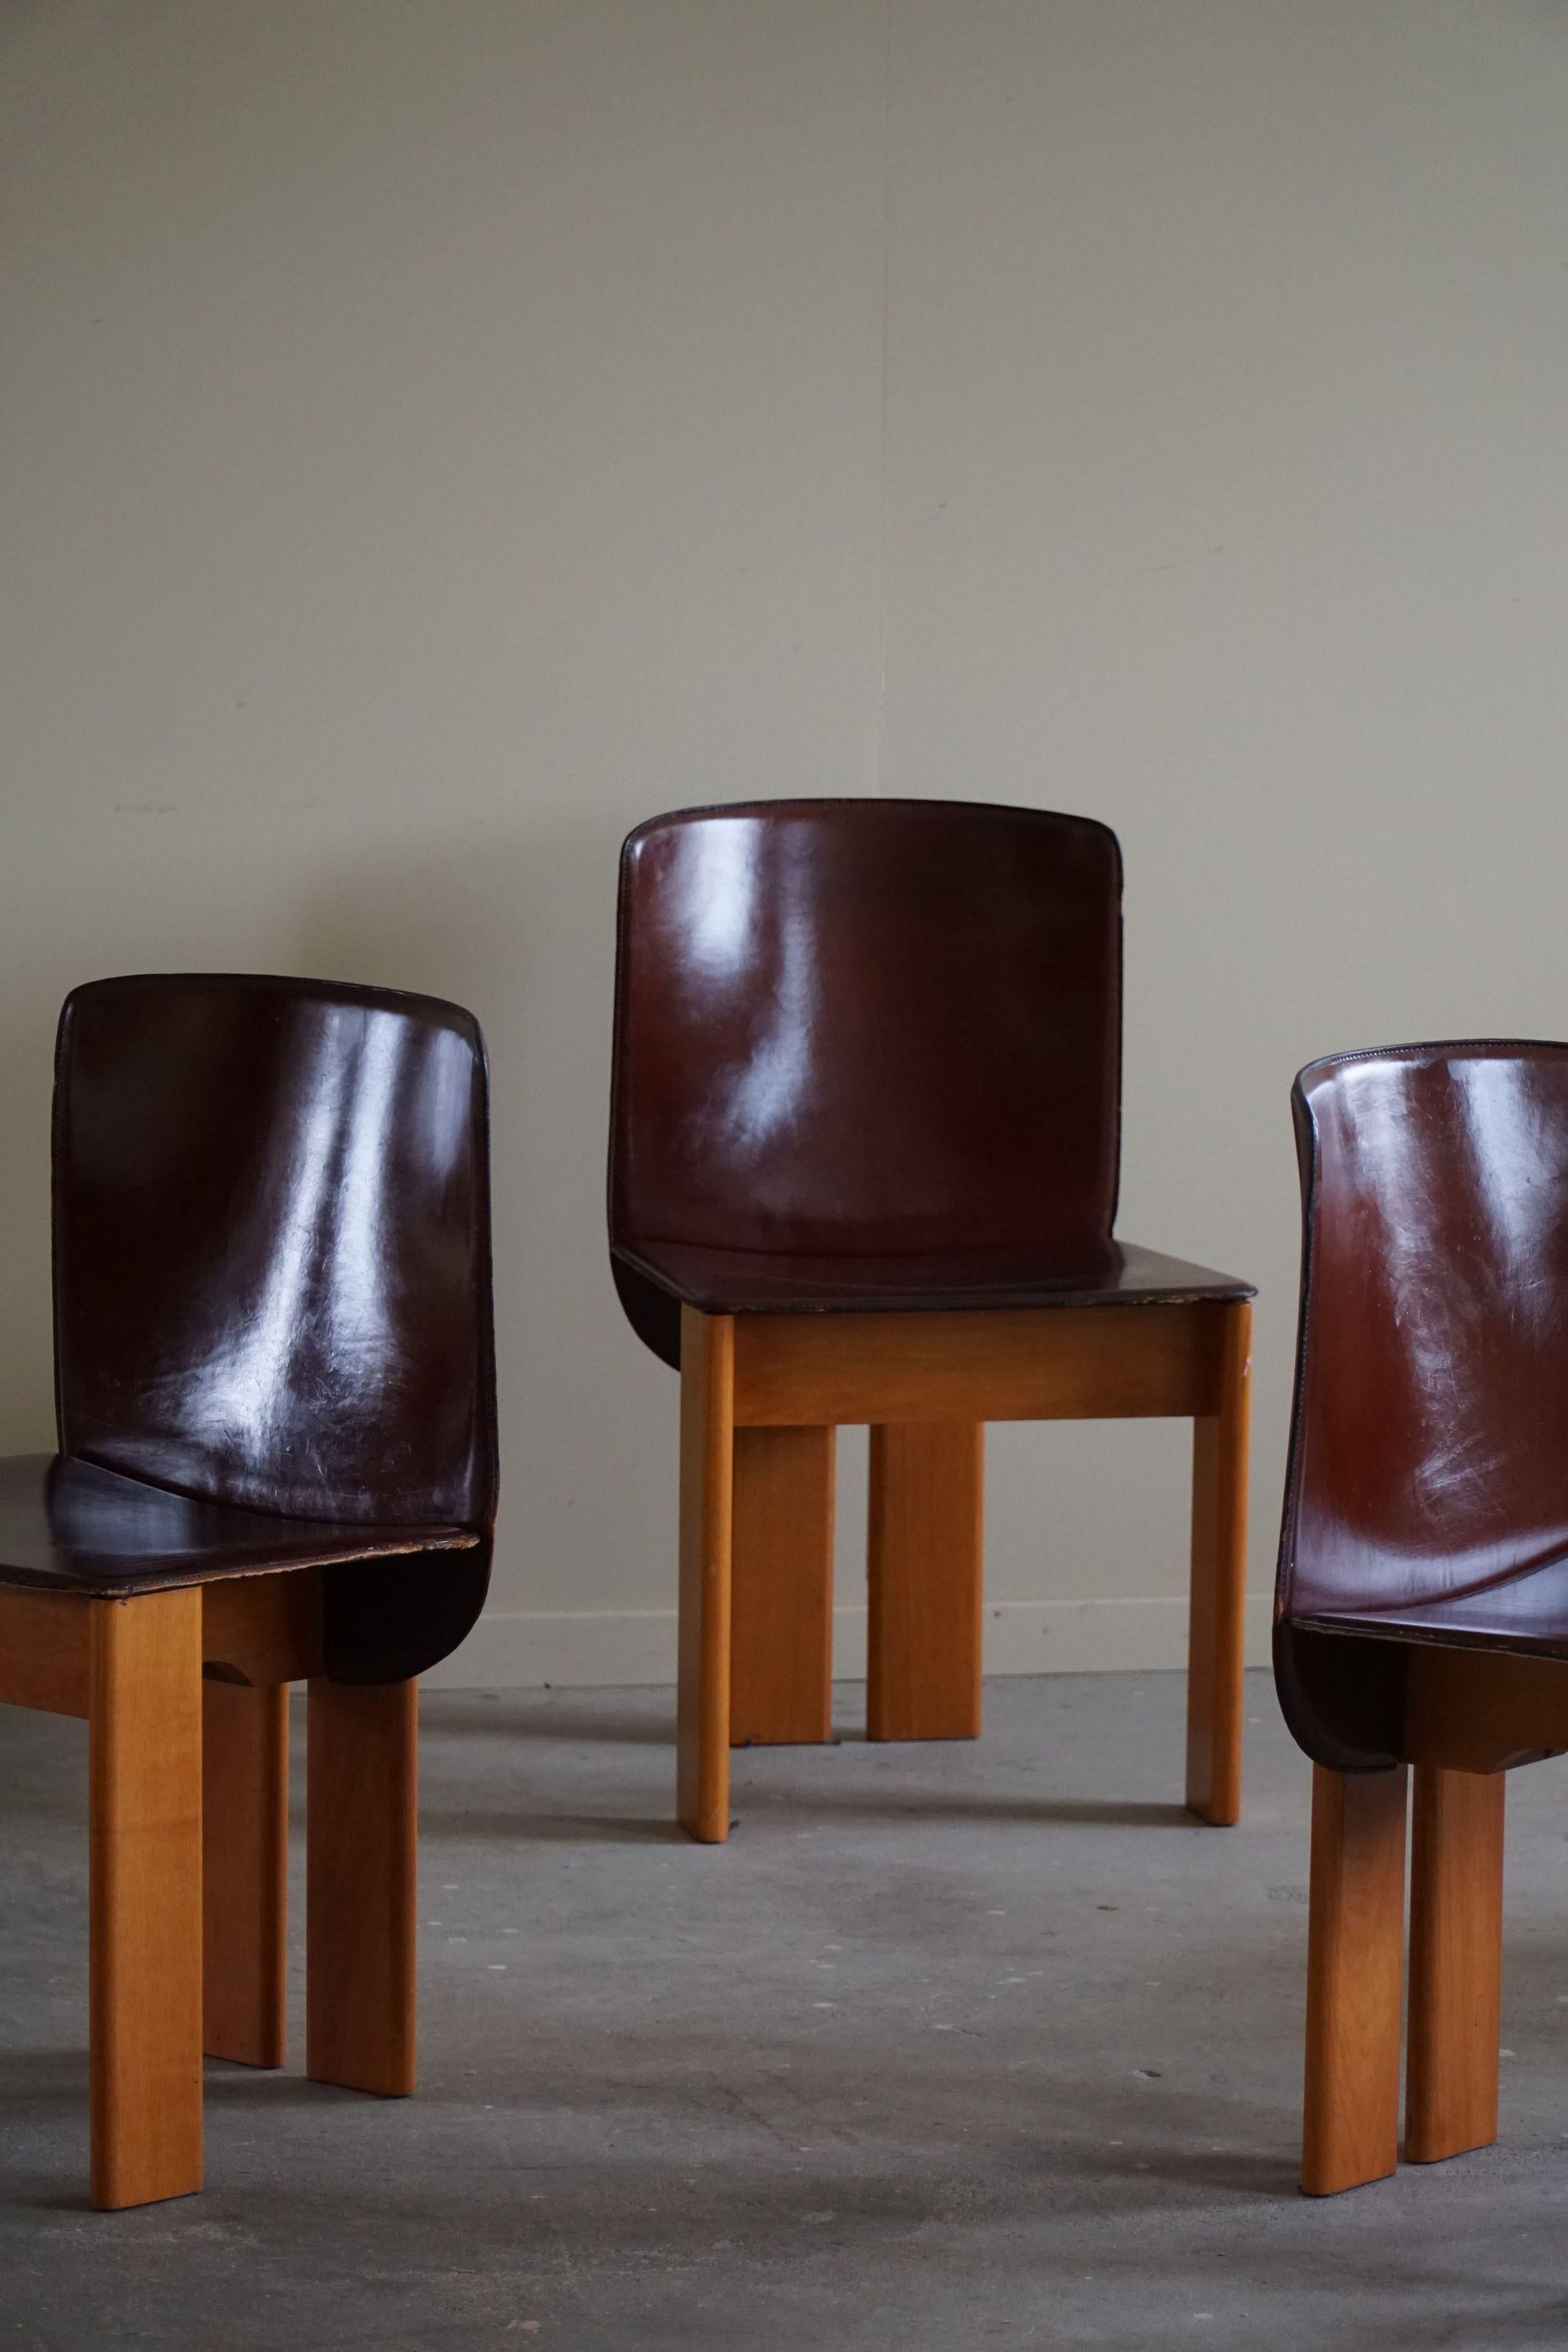 Italian Mid Century Modern, Set of 4 Leather Chairs, Tobia Scarpa Style, 1960s For Sale 10